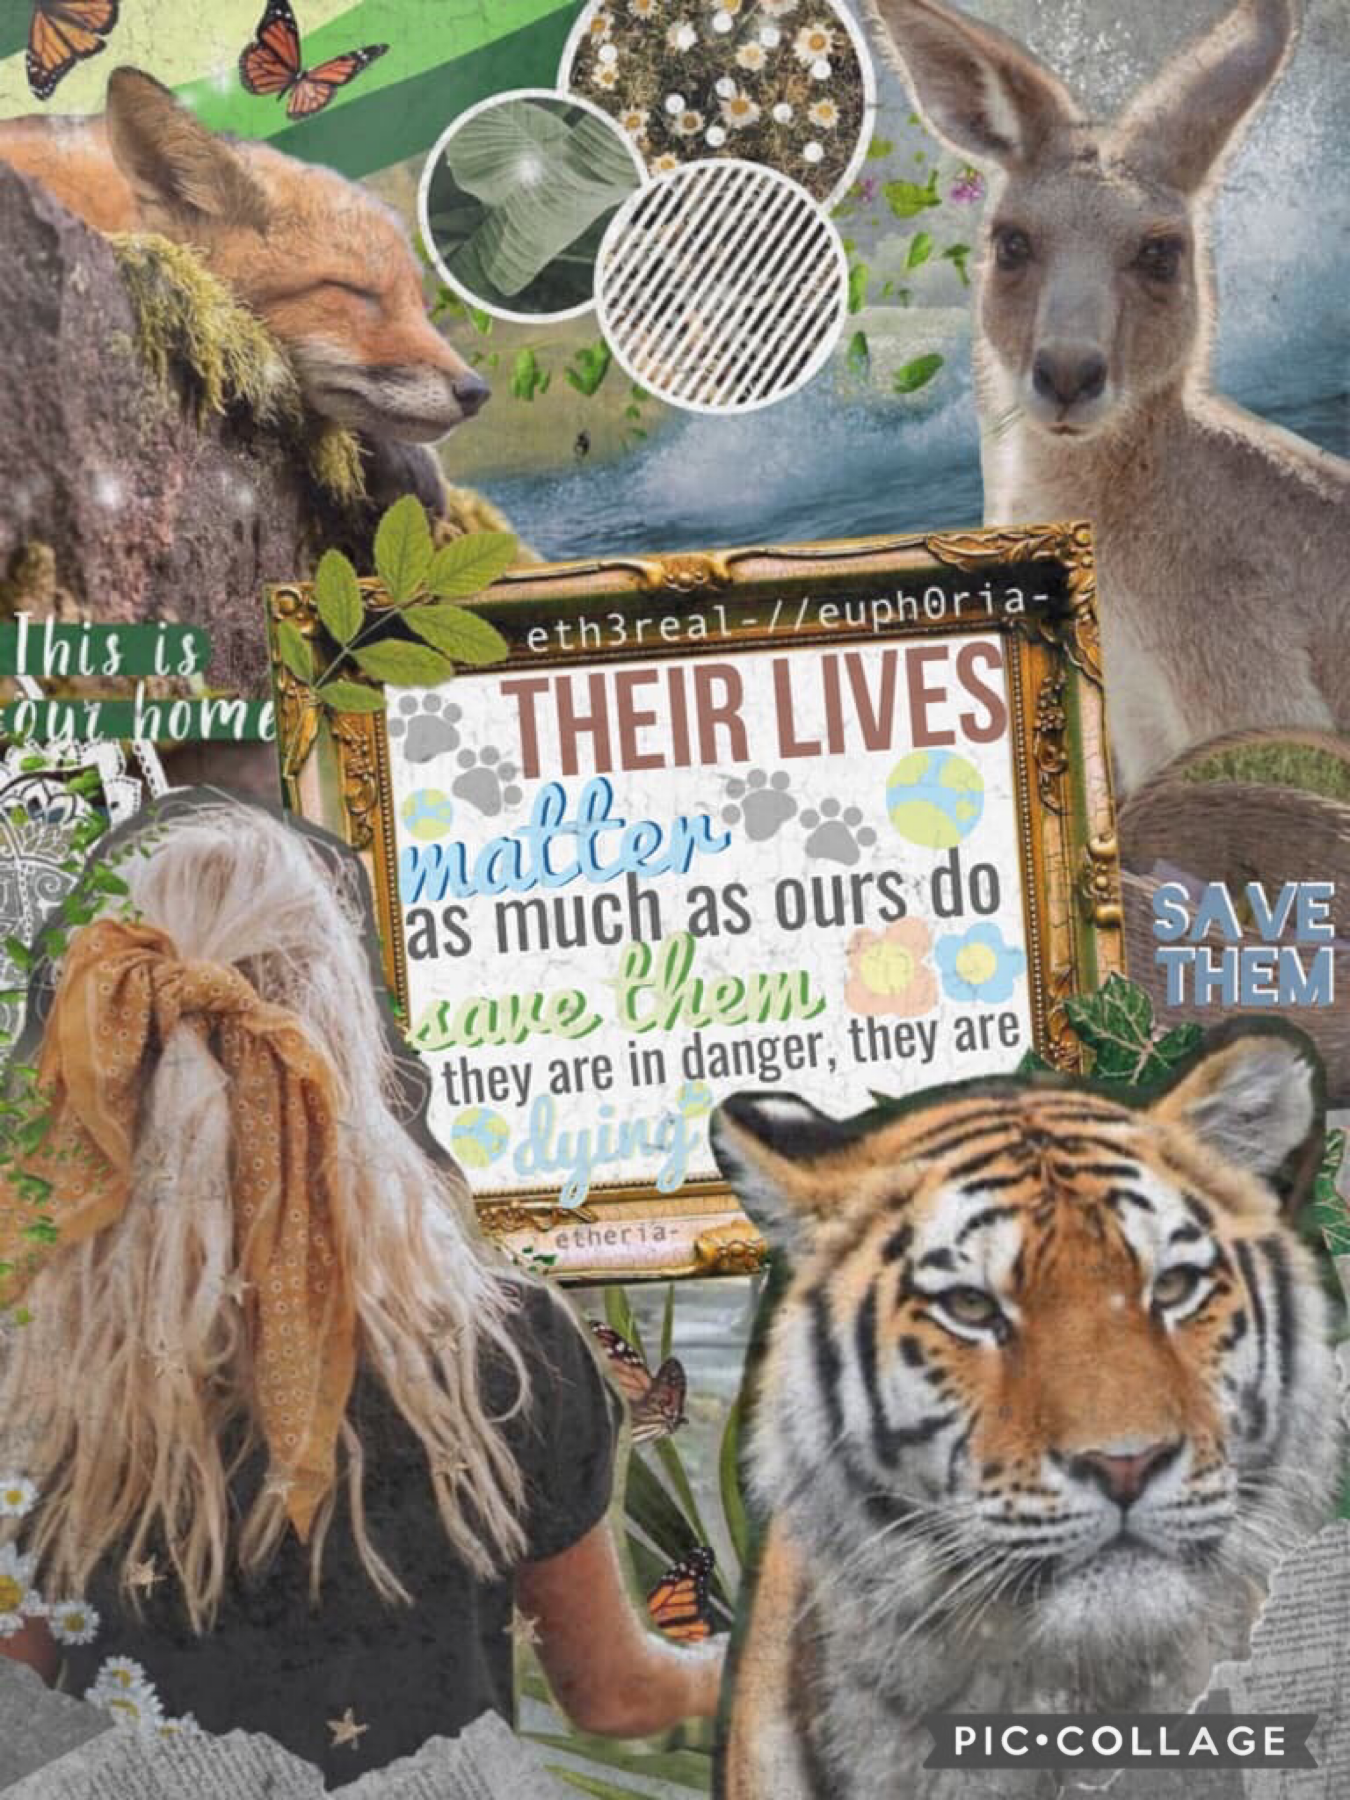 🐾Tap🐾
Here’s our collage for National Wildlife day! Caite did the bg and lyly did the text! Go follow our mains if you haven’t already!